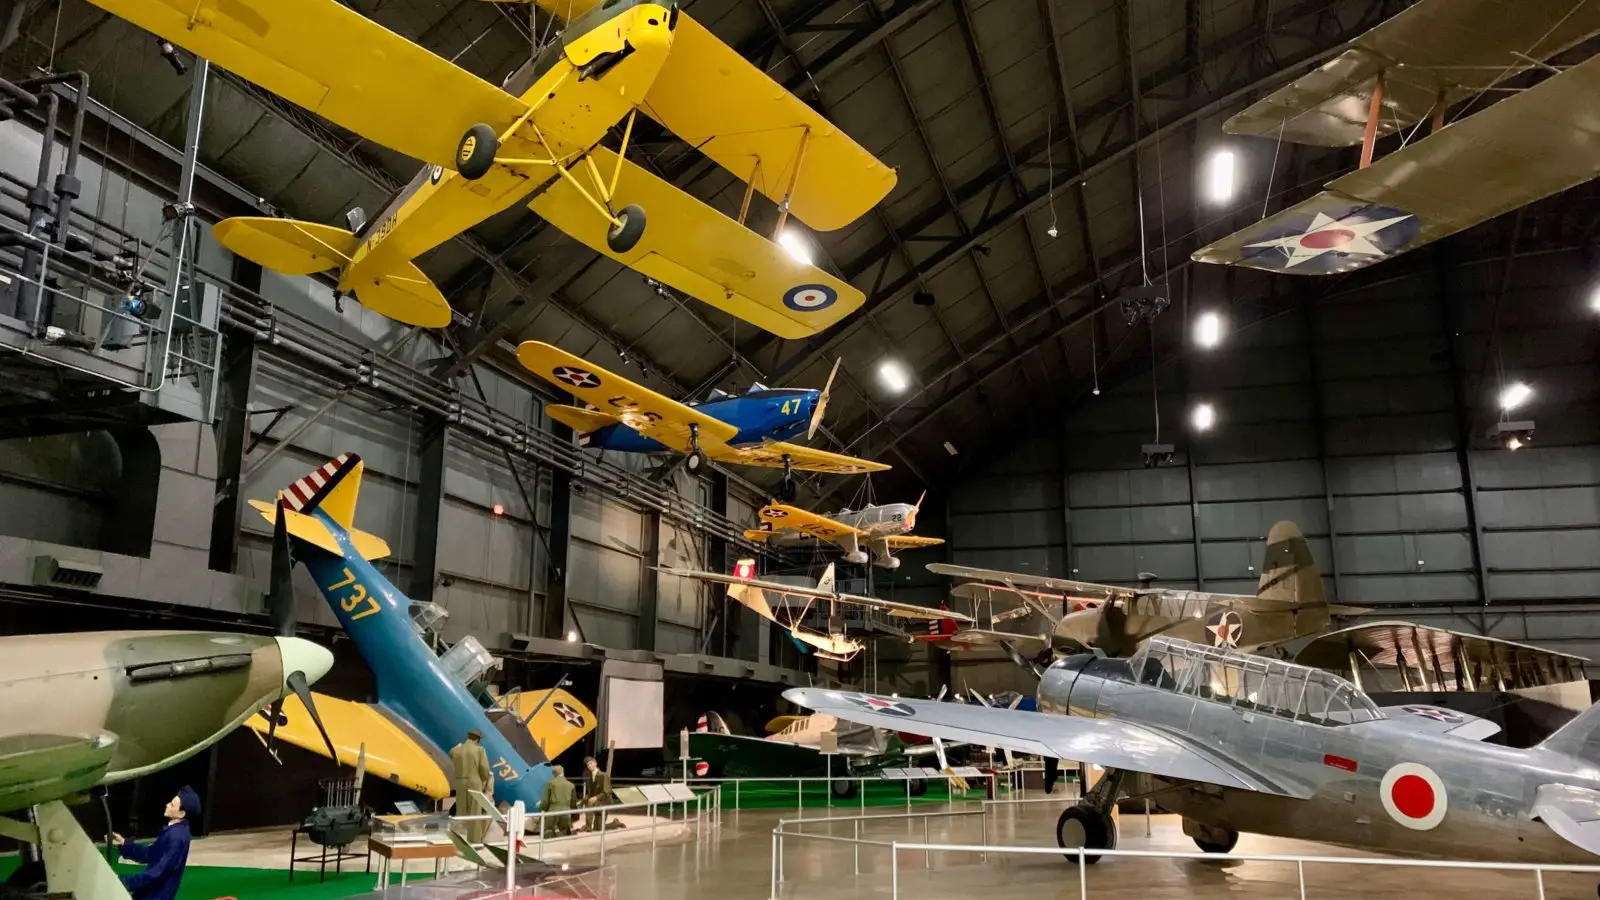 Early Years Gallery at the Air Force Museum, with big yellow biplane in foreground